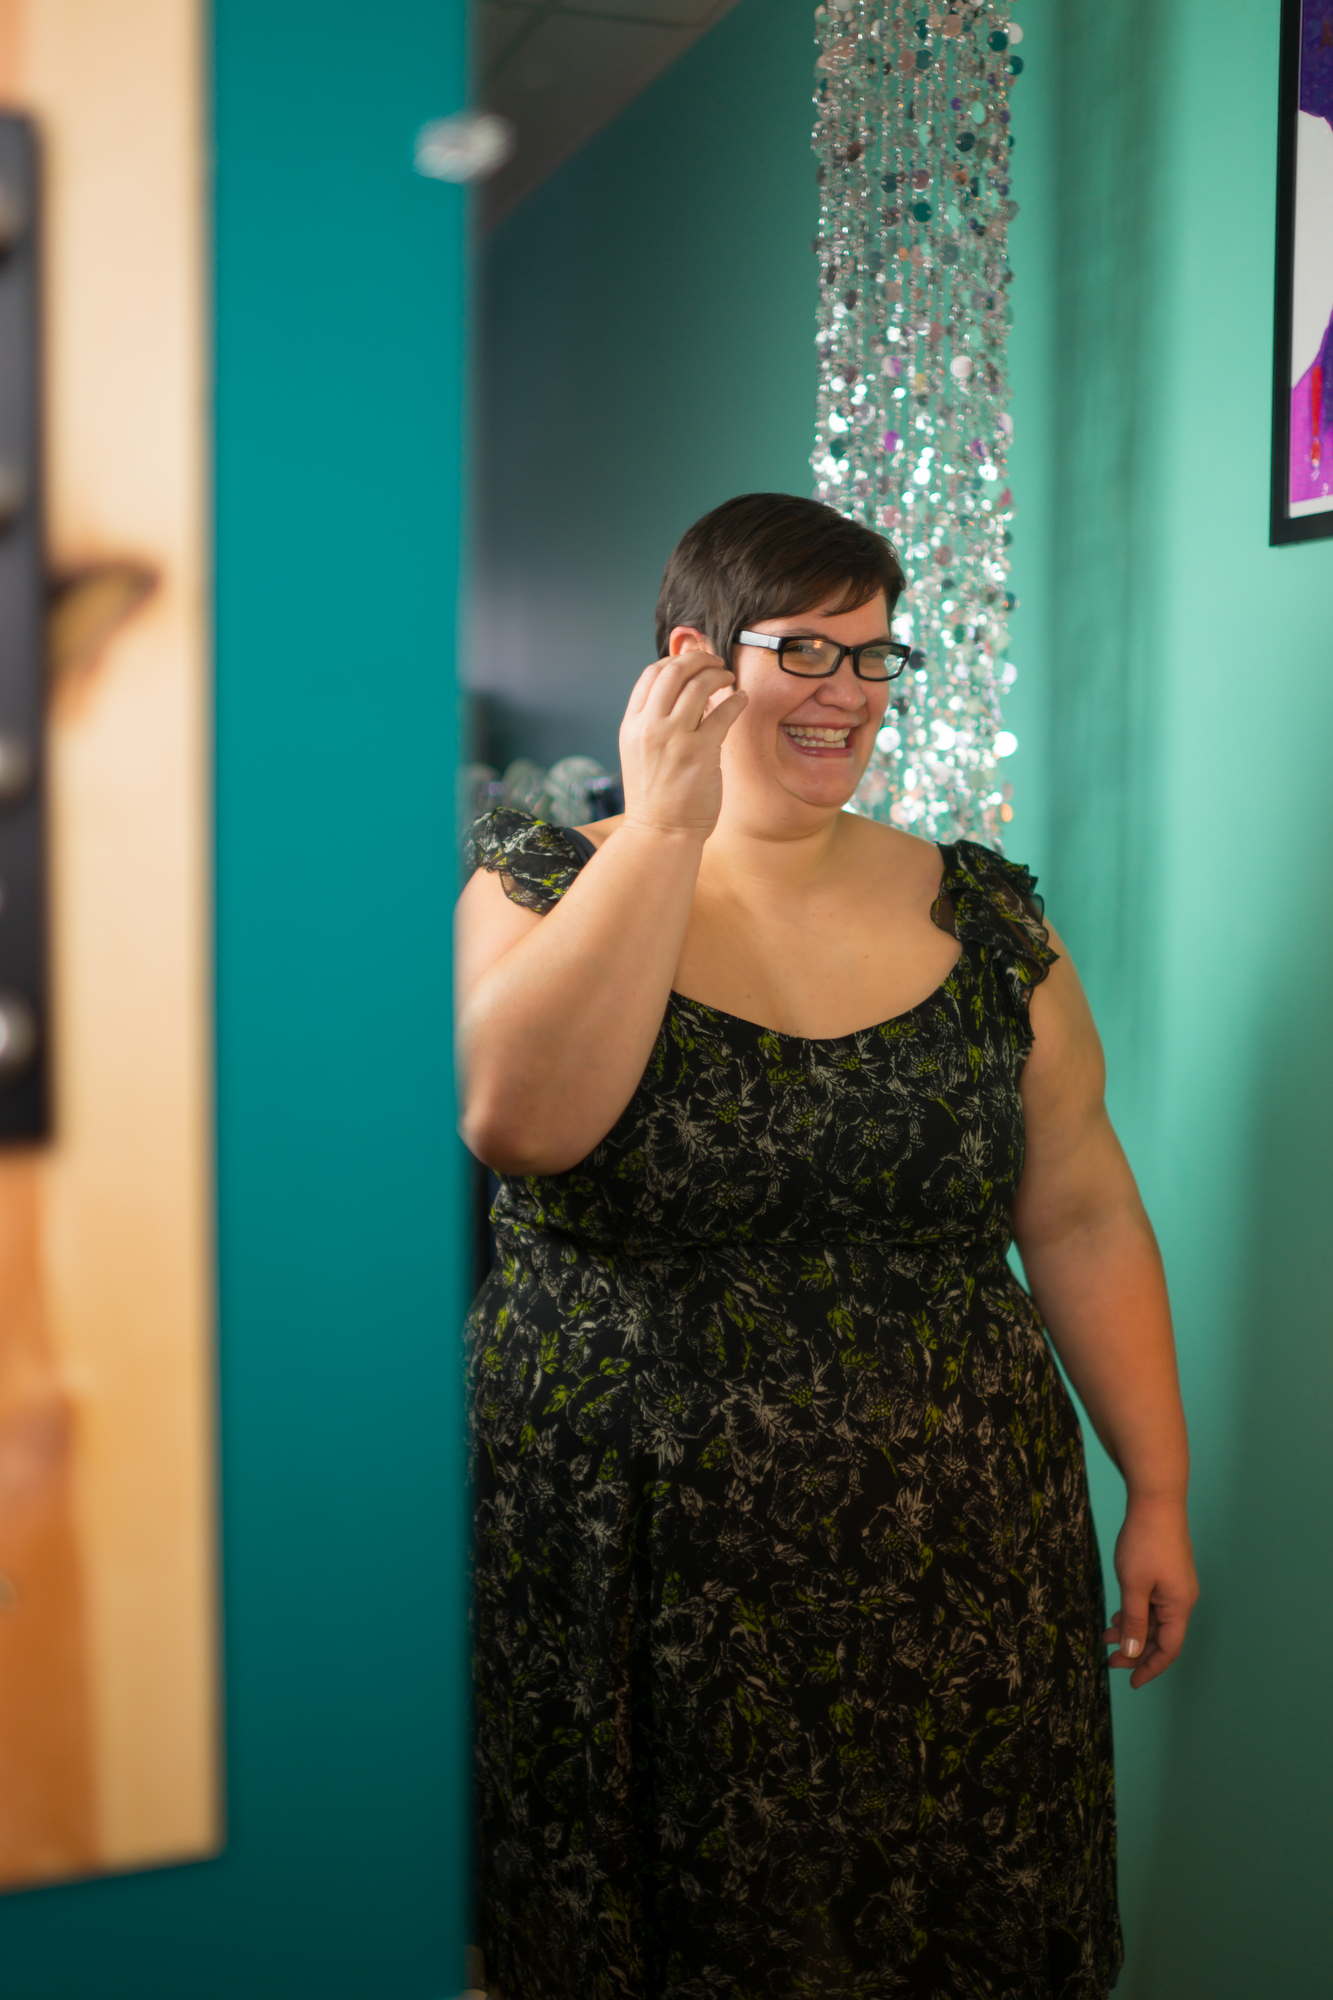 A fat woman laughs in a dark dress during a potrait photo shoot